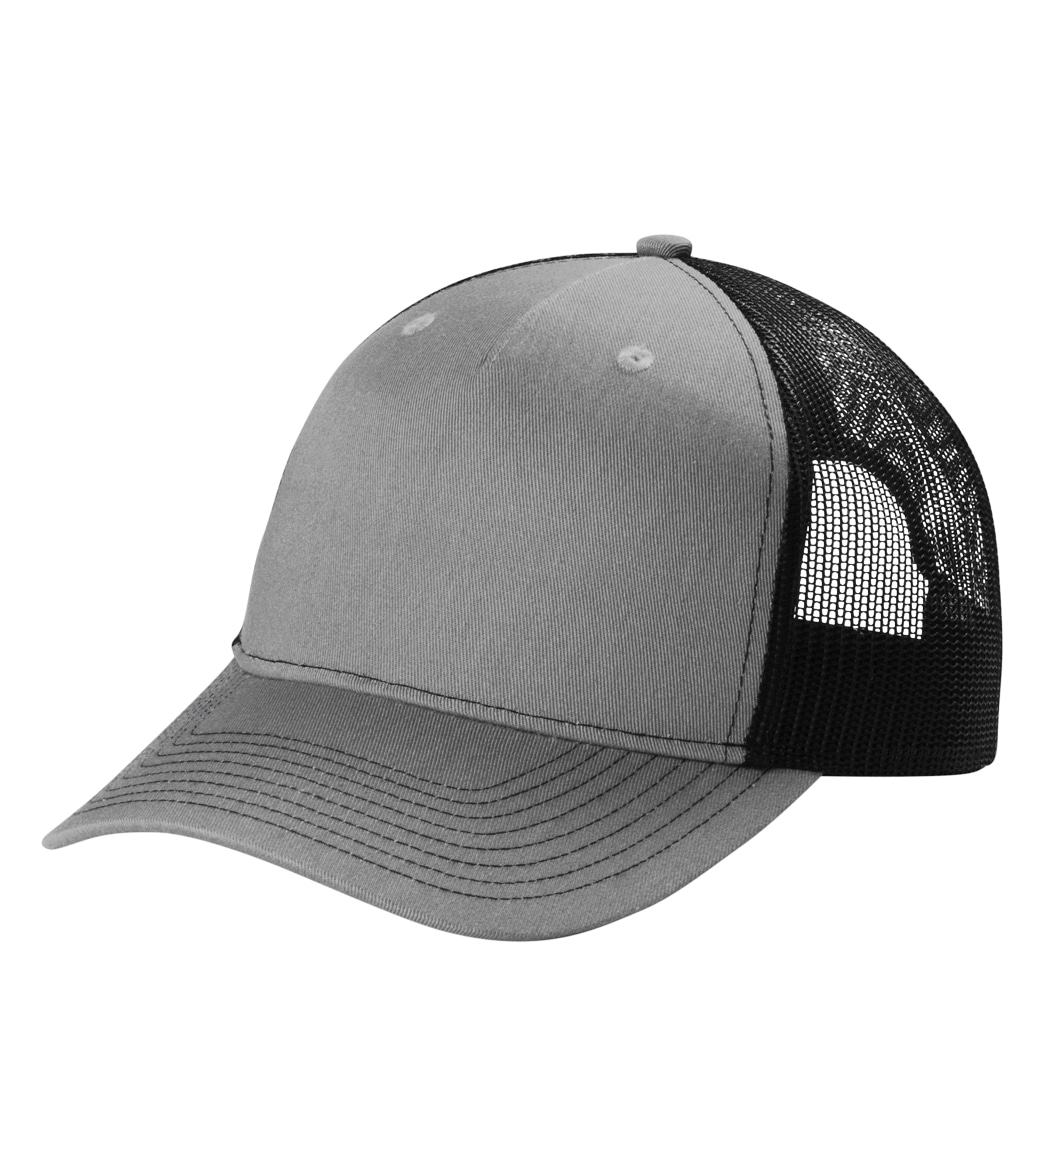 Snapback Trucker Hat - Heather Grey/Black One Size Cotton/Polyester - Swimoutlet.com